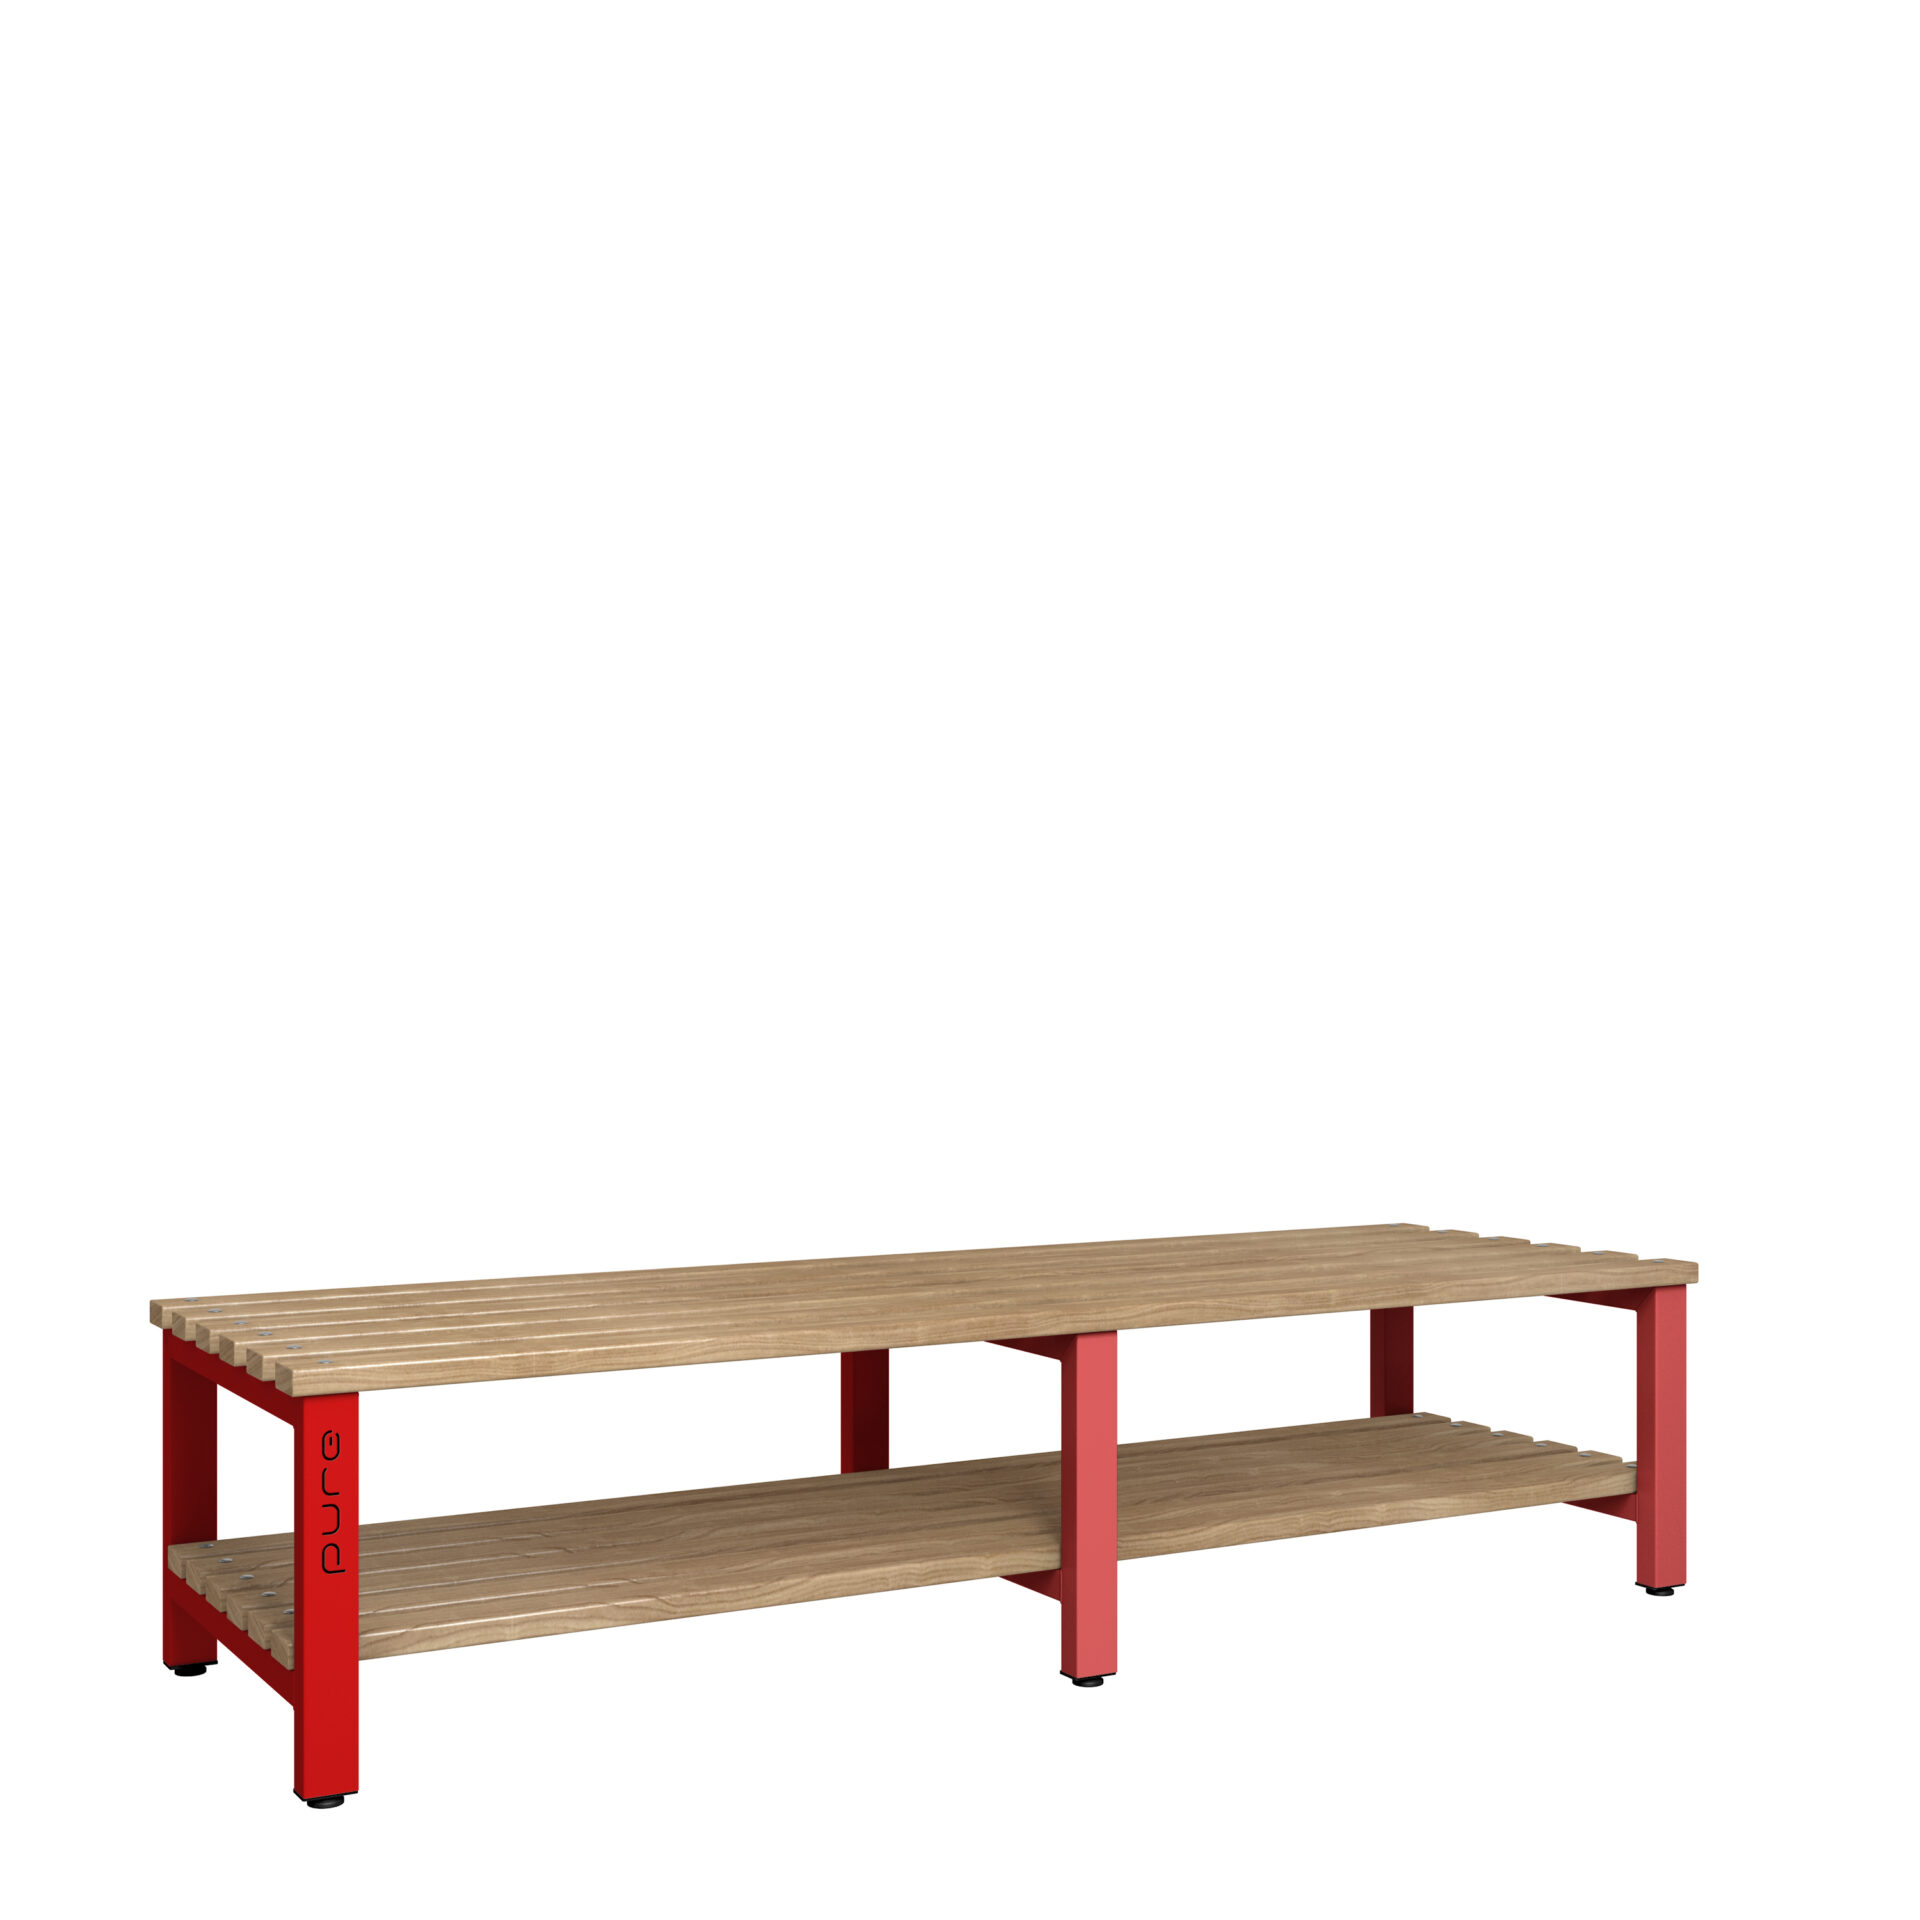 Pure Carbon Zero Double Sided 2000mm Standard Bench With Shoe Shelf - Flame Red / Solid Timber